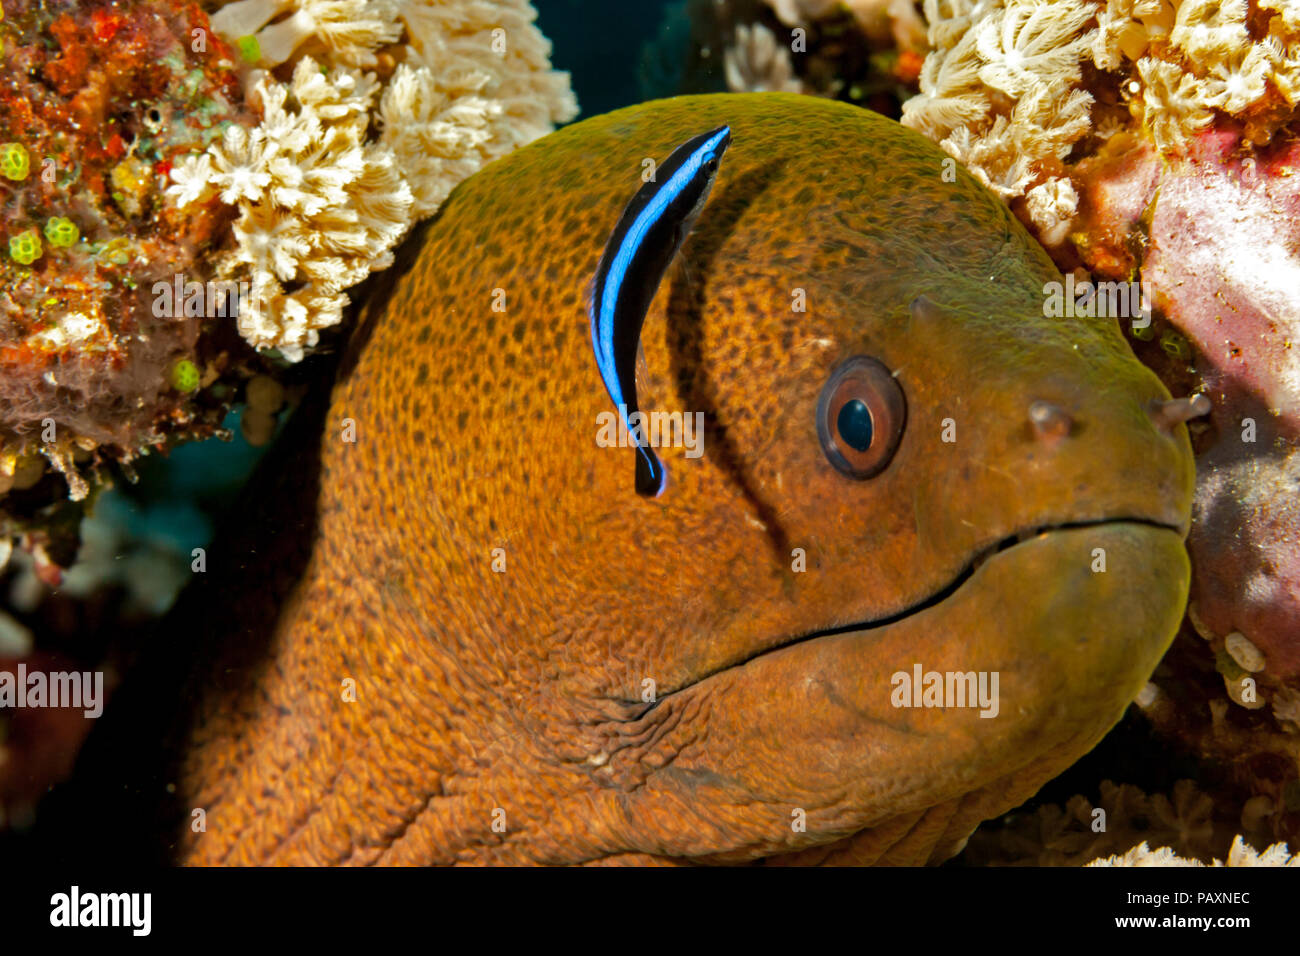 A juvenile bluestreak cleaner wrasse, Labroides dimidiatus, inspects a giant moray eel, Gymnothorax javanicus, off the island of Yap, Micronesia. Stock Photo